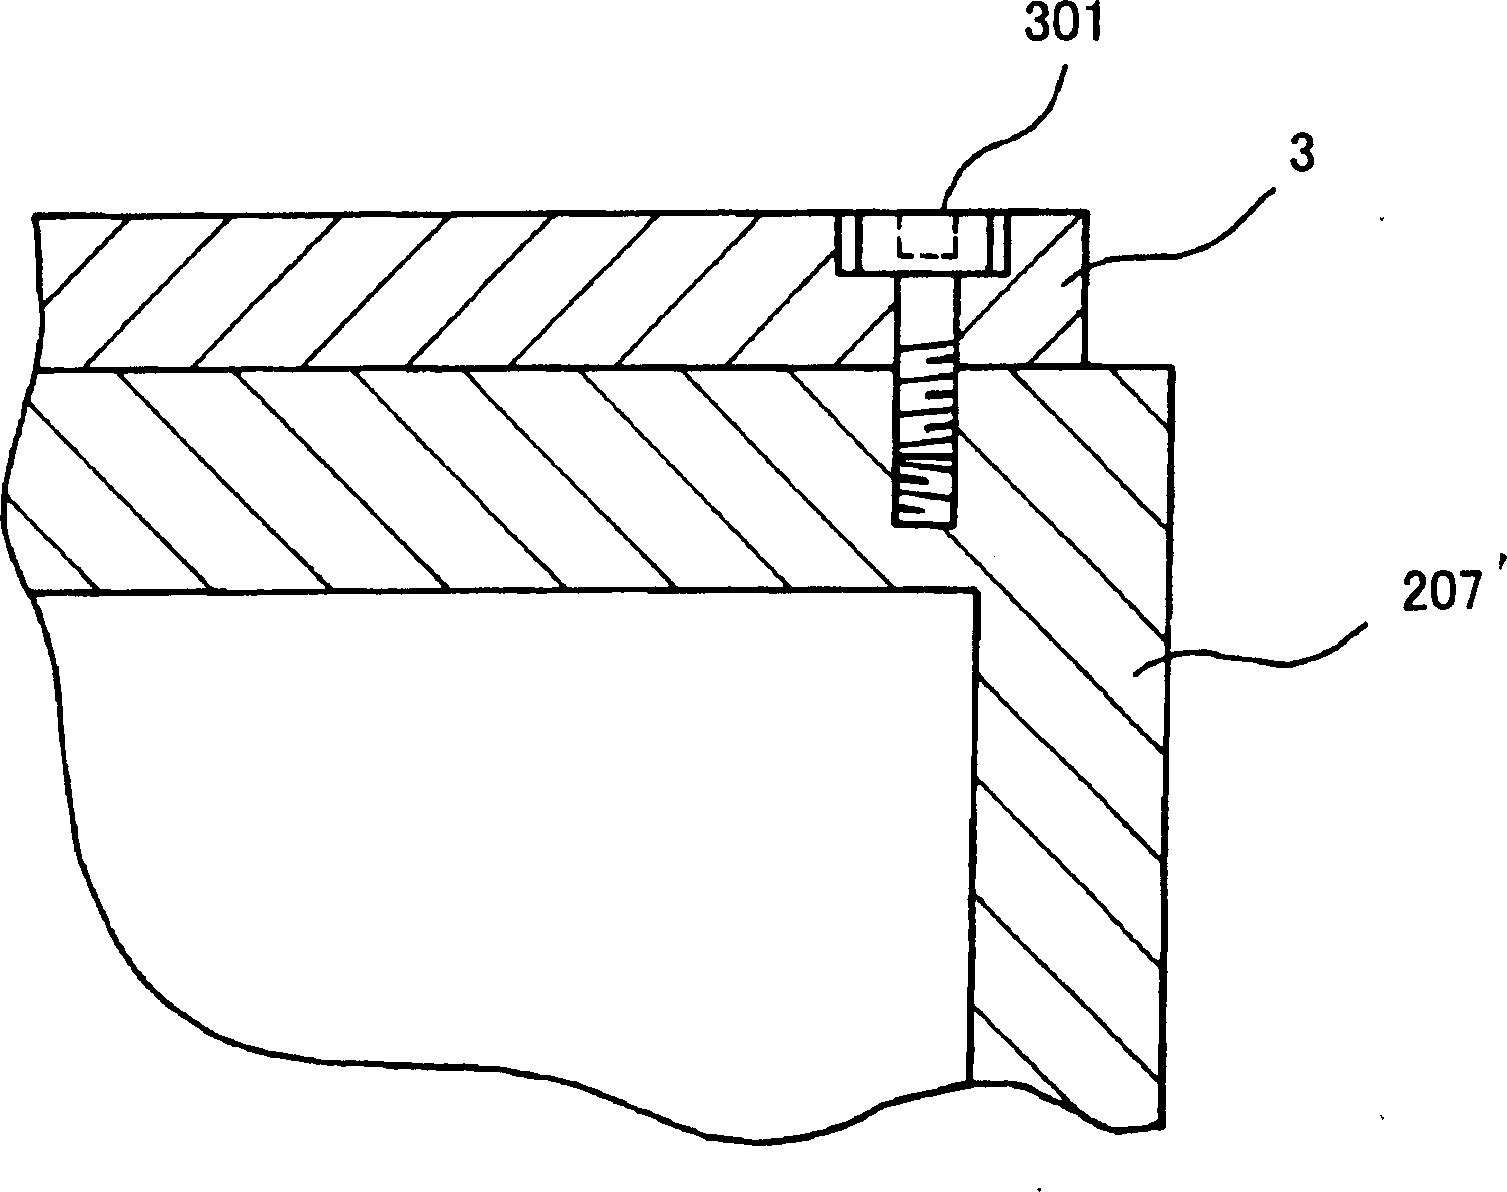 Magnetic resonance imaging apparatus and static magnetic field generating apparats used therefor